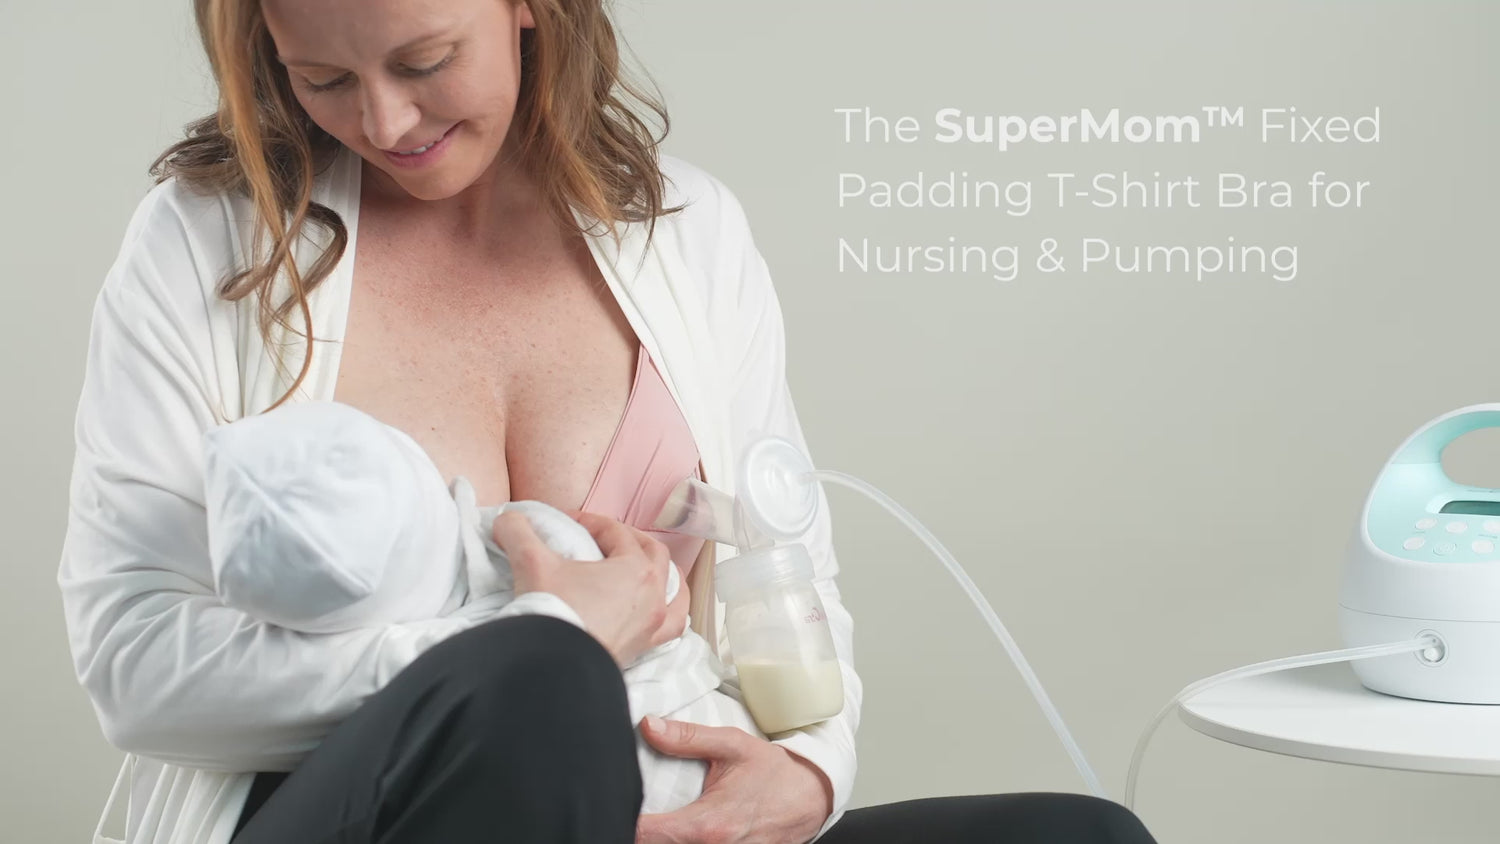 Your nursing/pumping sitch just got a whole lot easier. This bra